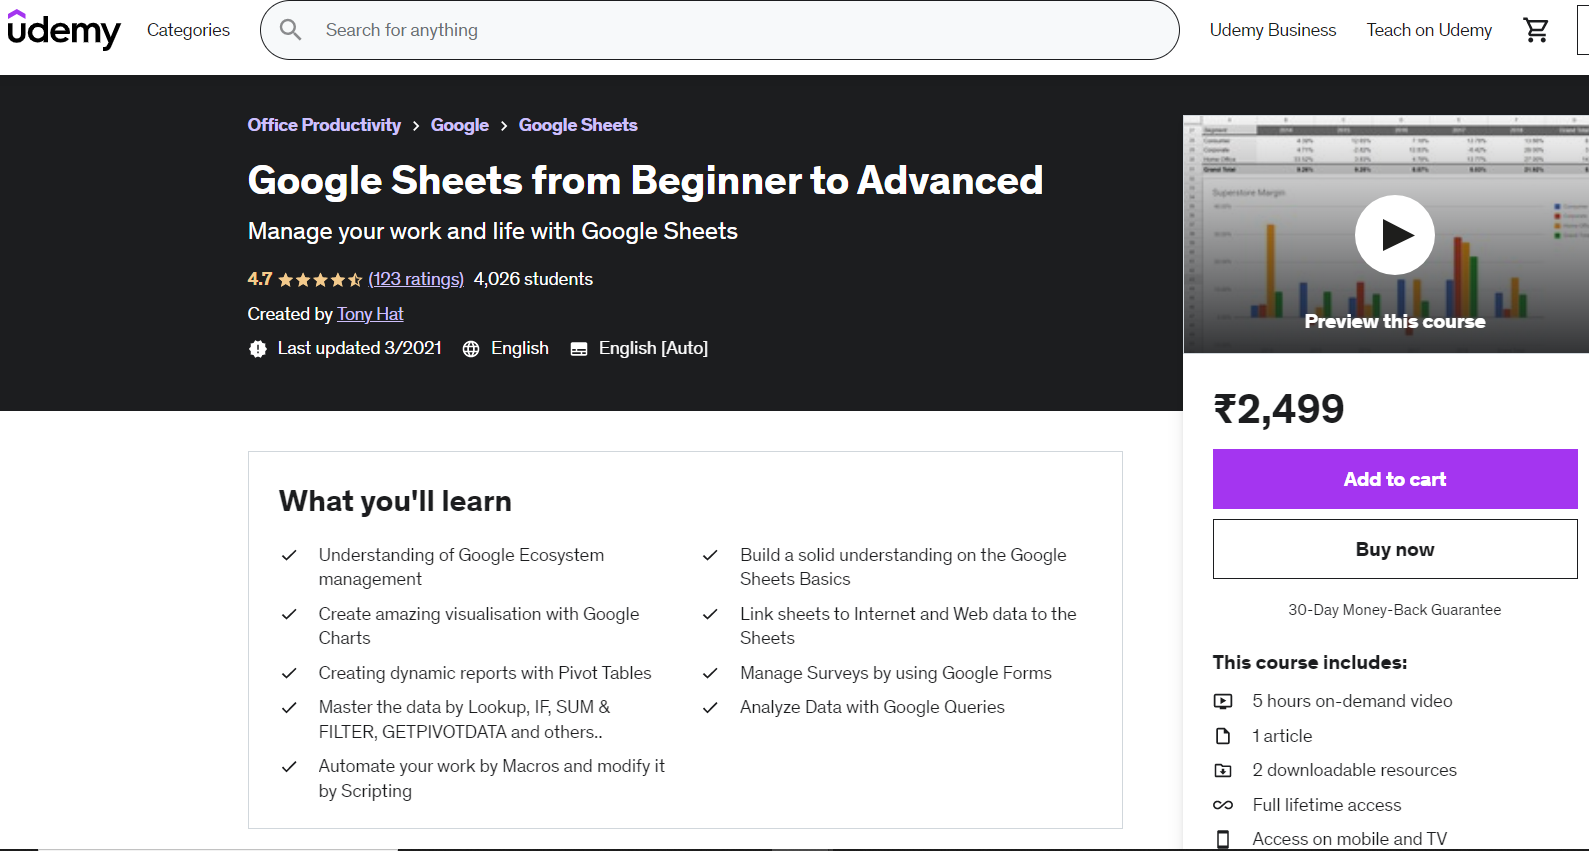 Google Sheets from Beginner to Advanced